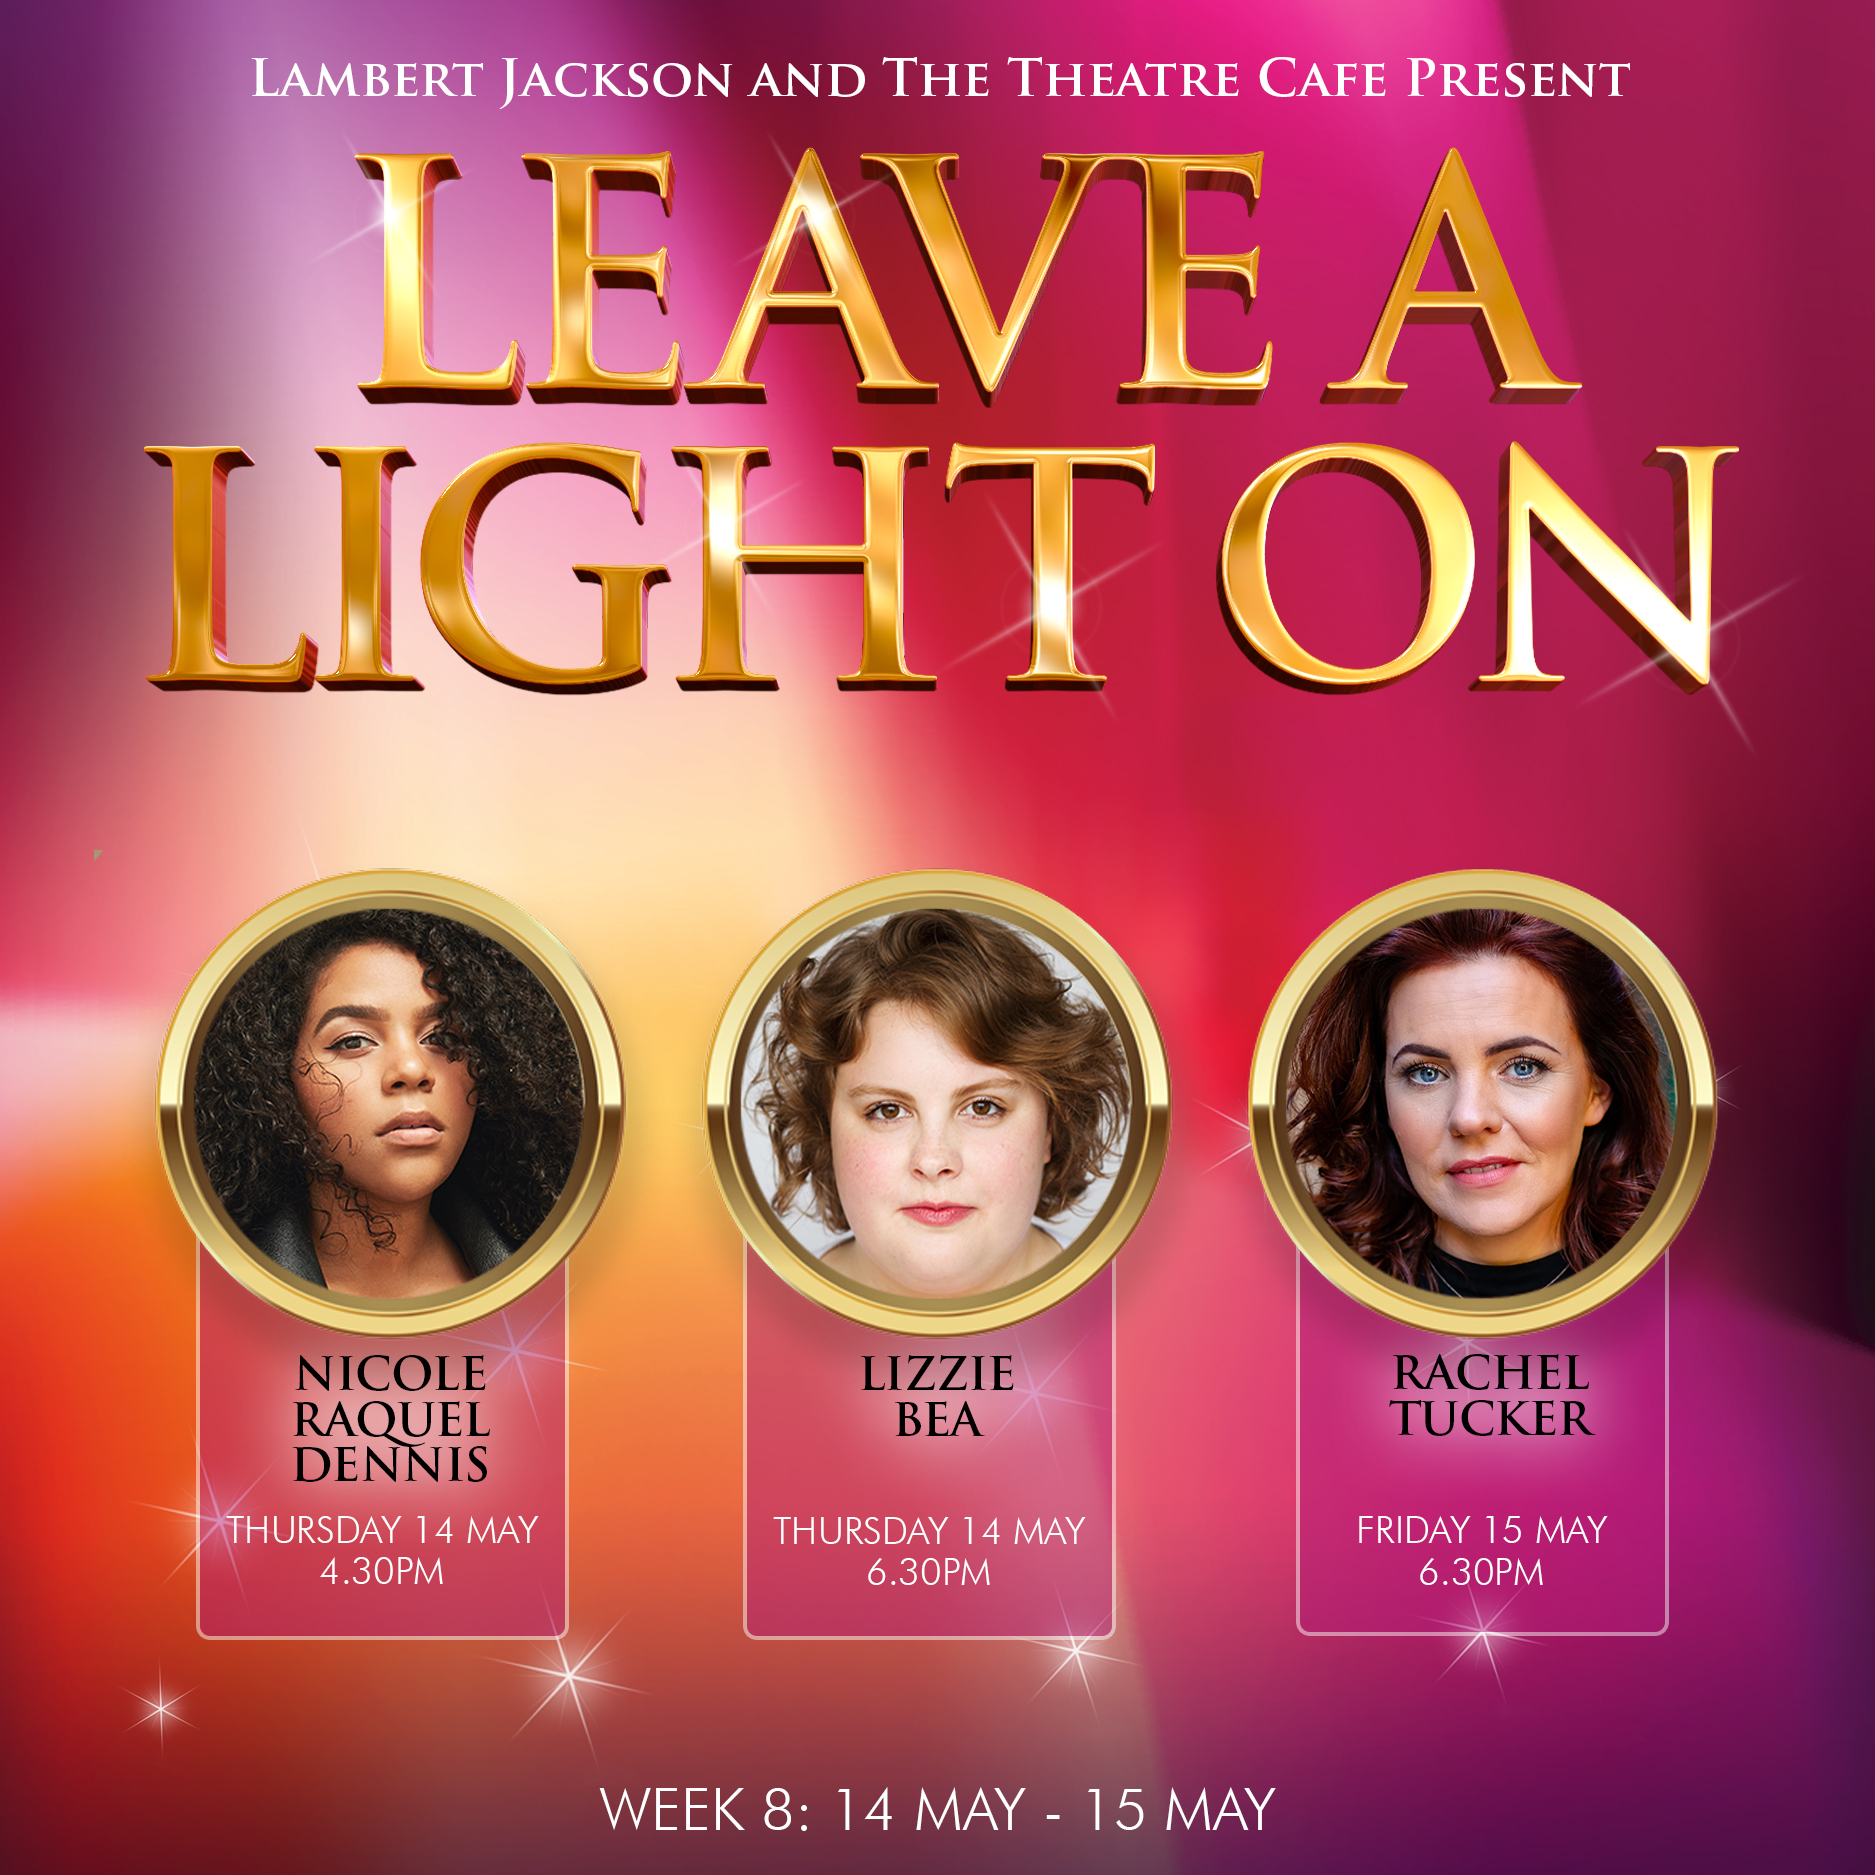 NEWS: Lineup announced for week 8 of Leave A Light On